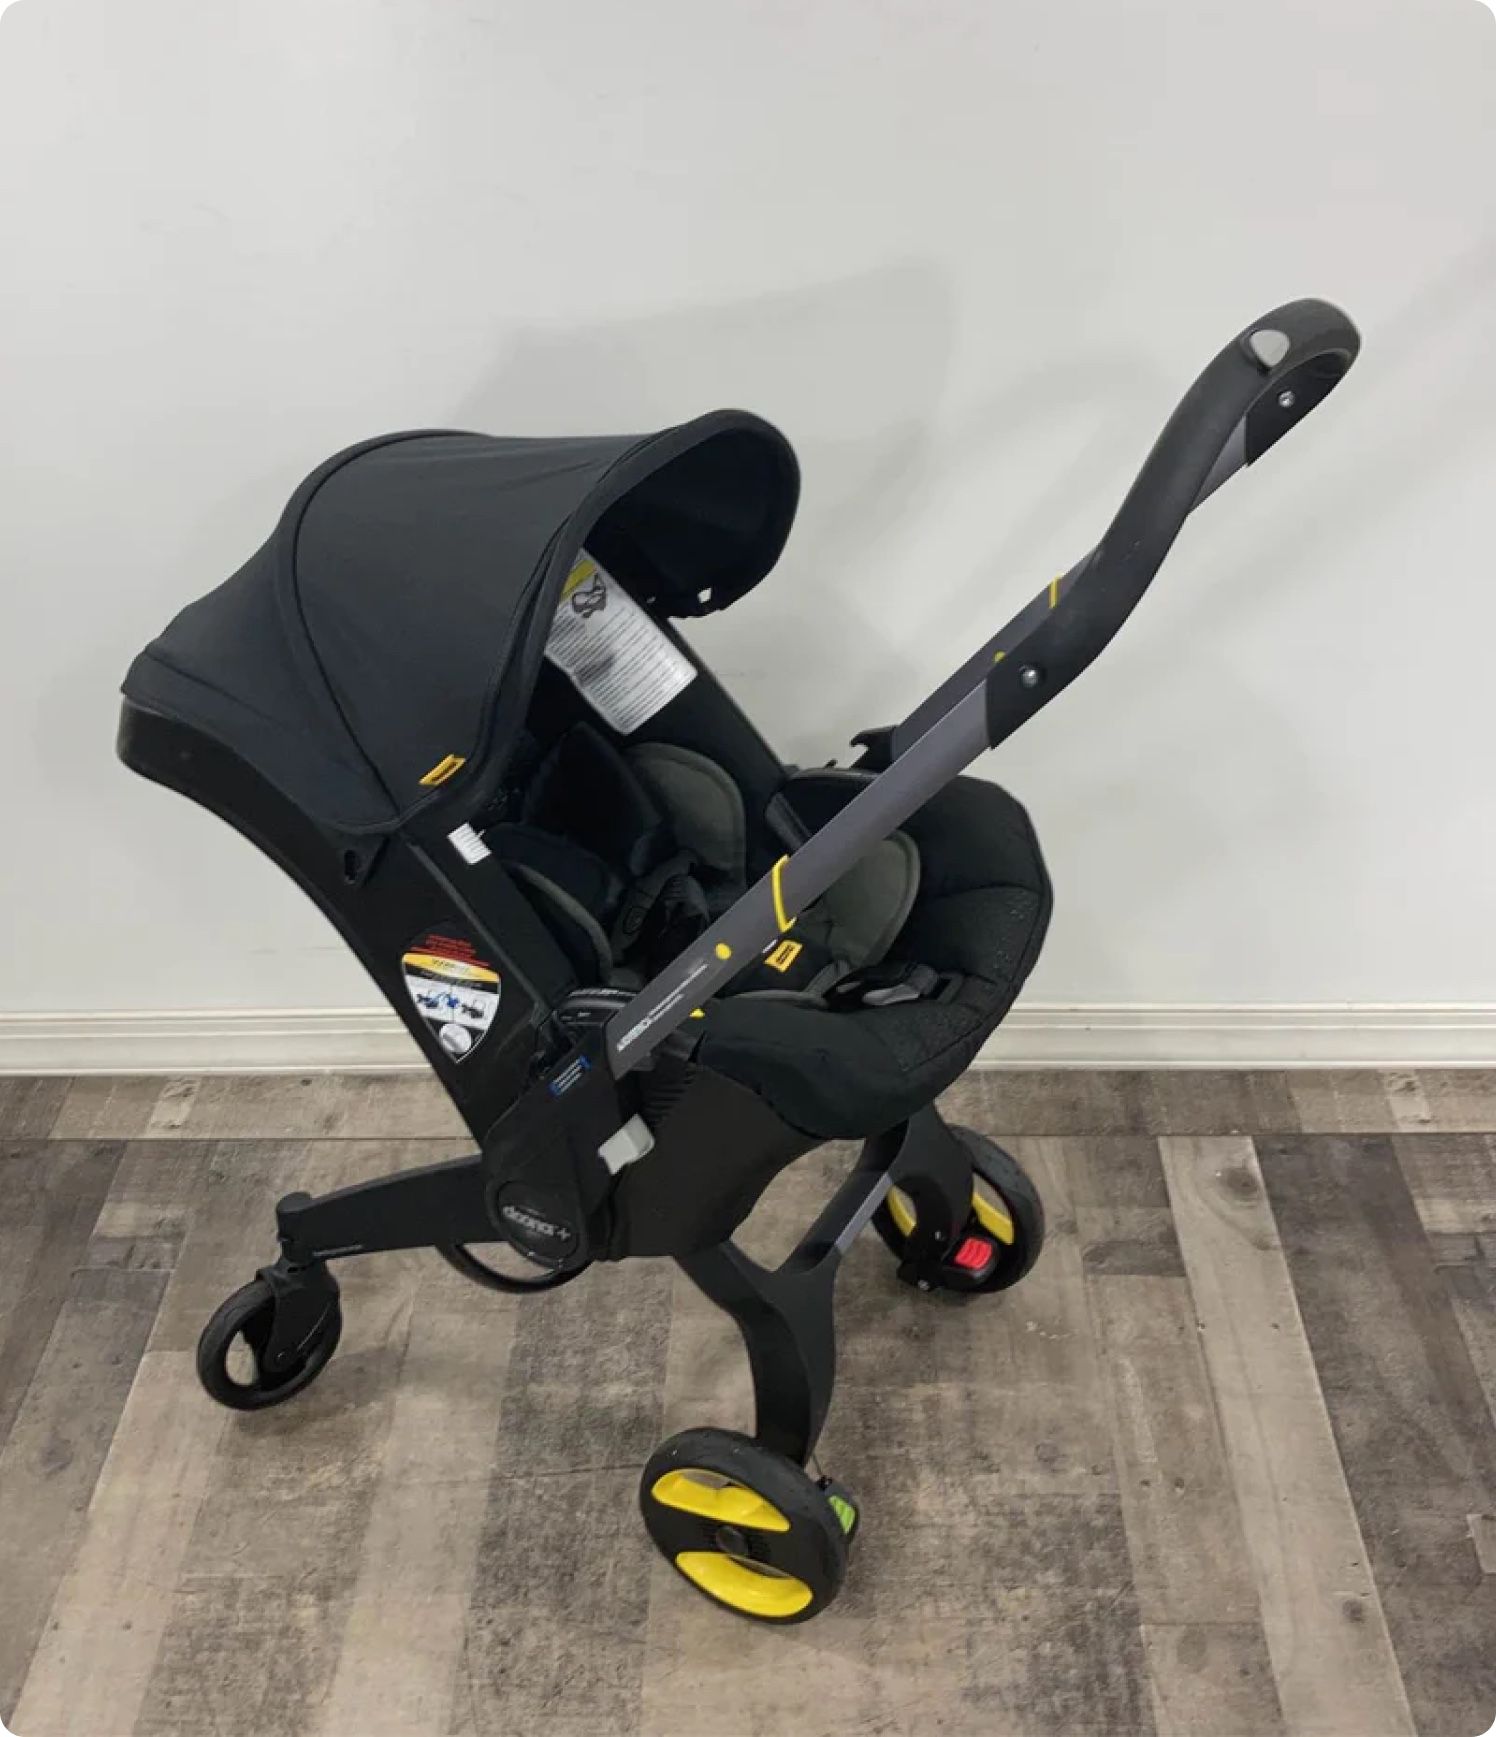 Doona Car Seat/Stroller with Base